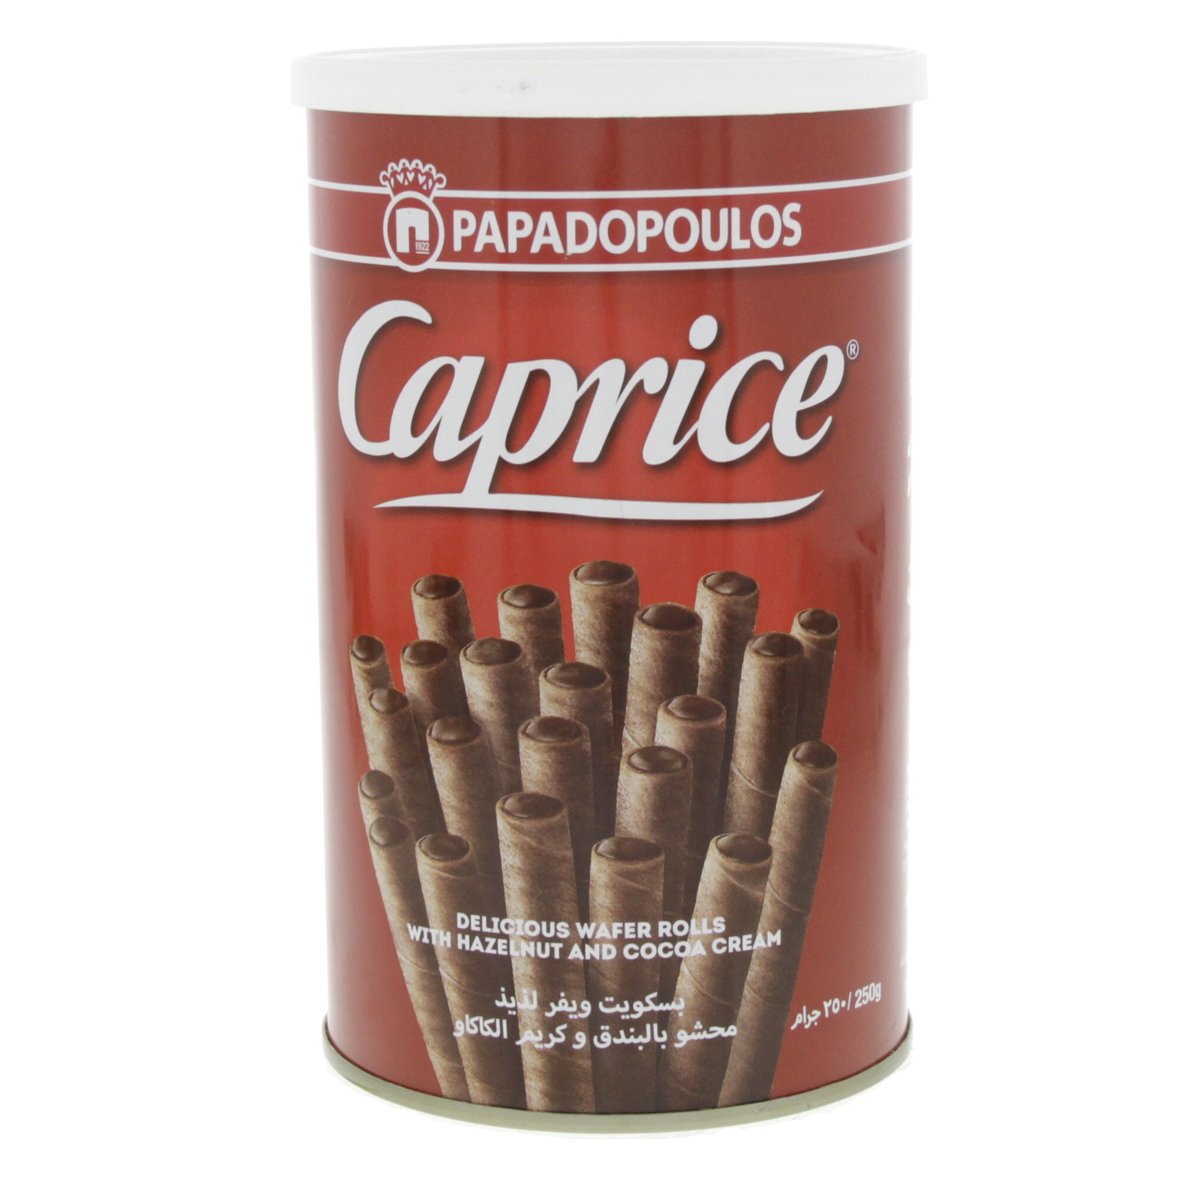 Papadopoulos Caprice Wafer Rolls Hazelnut And Cocoa Cream 250 g